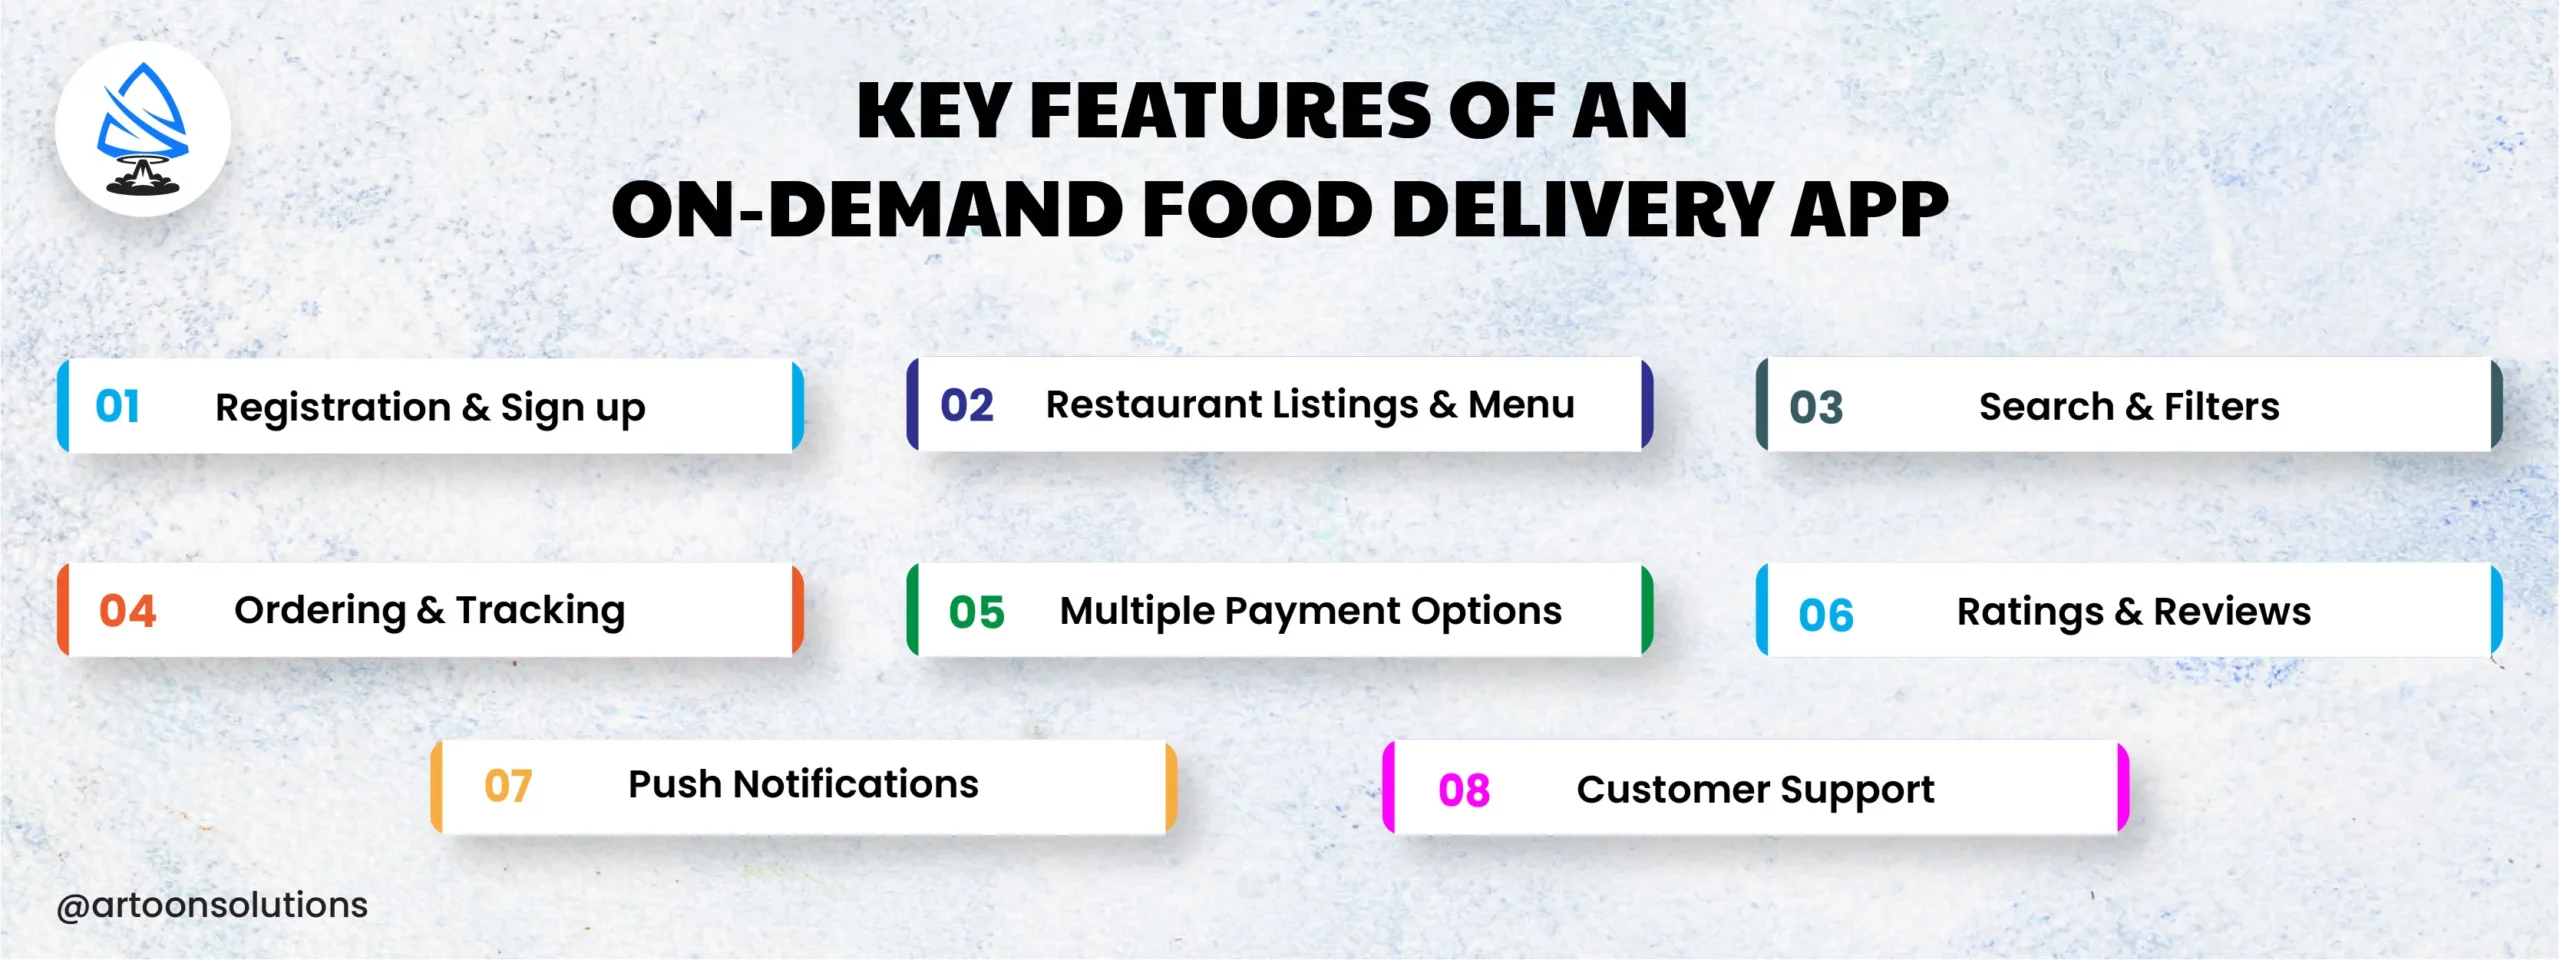 Key Features of an On-Demand Food Delivery App Development